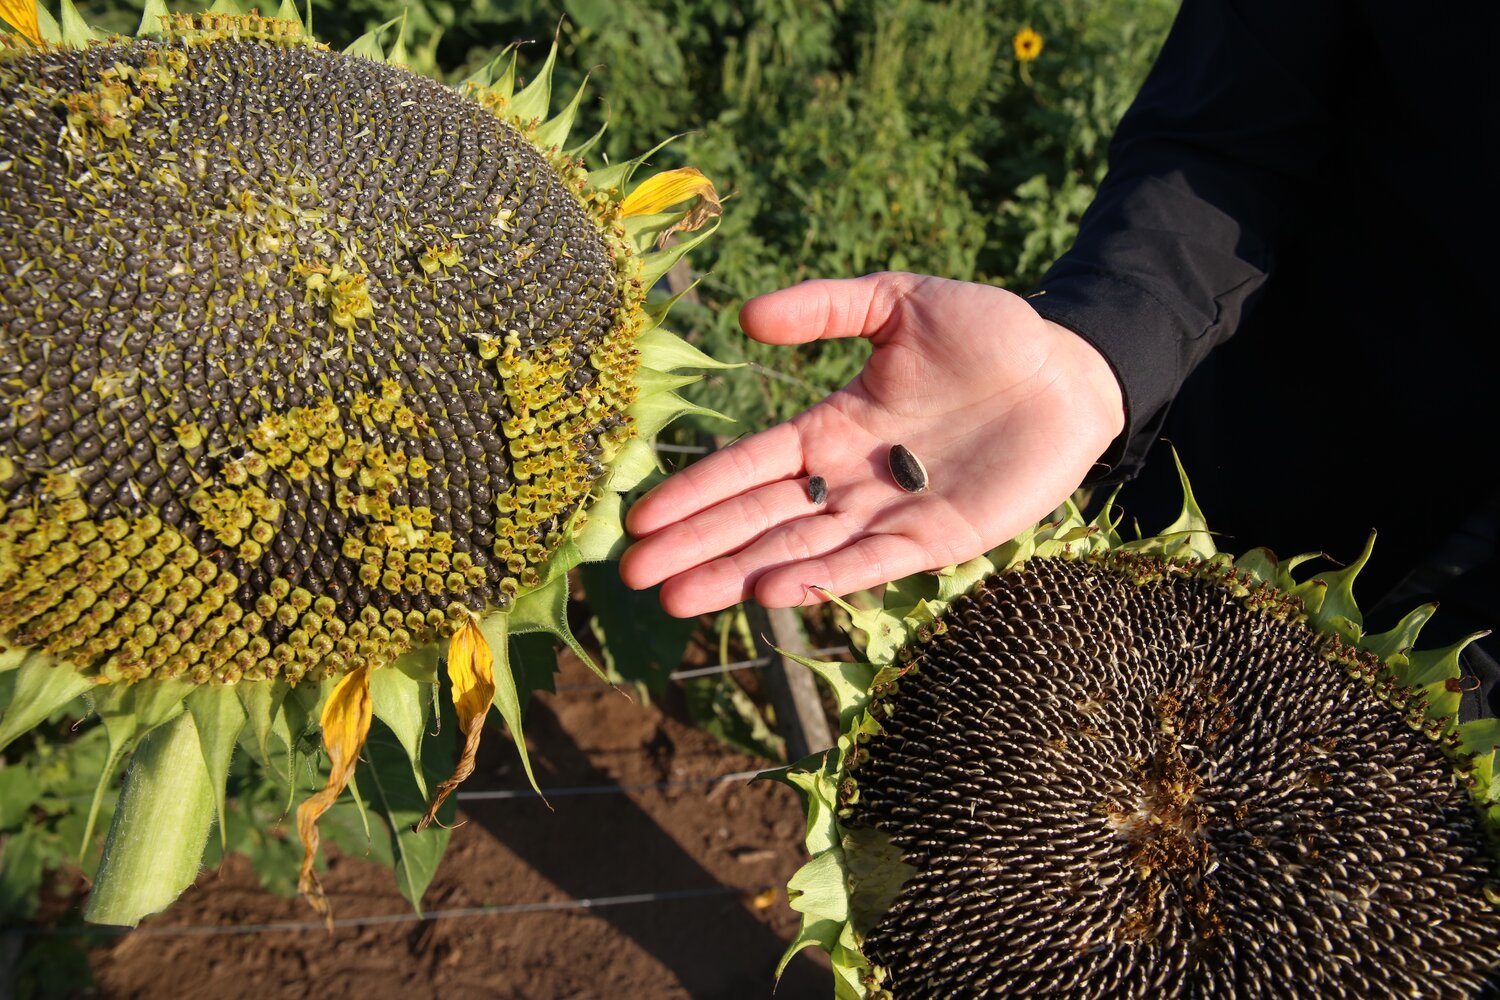 Sunflowers are mostly grown as an oilseed or a confectionary crop. Breeders develop varieties according to the demands of producers and markets. Case in point: as clearly seen in this image, the confectionary sunflower head (left) is larger, as are its seeds, when compared to the oilseed sunflower head (right), which, however, has more oil in its seeds.